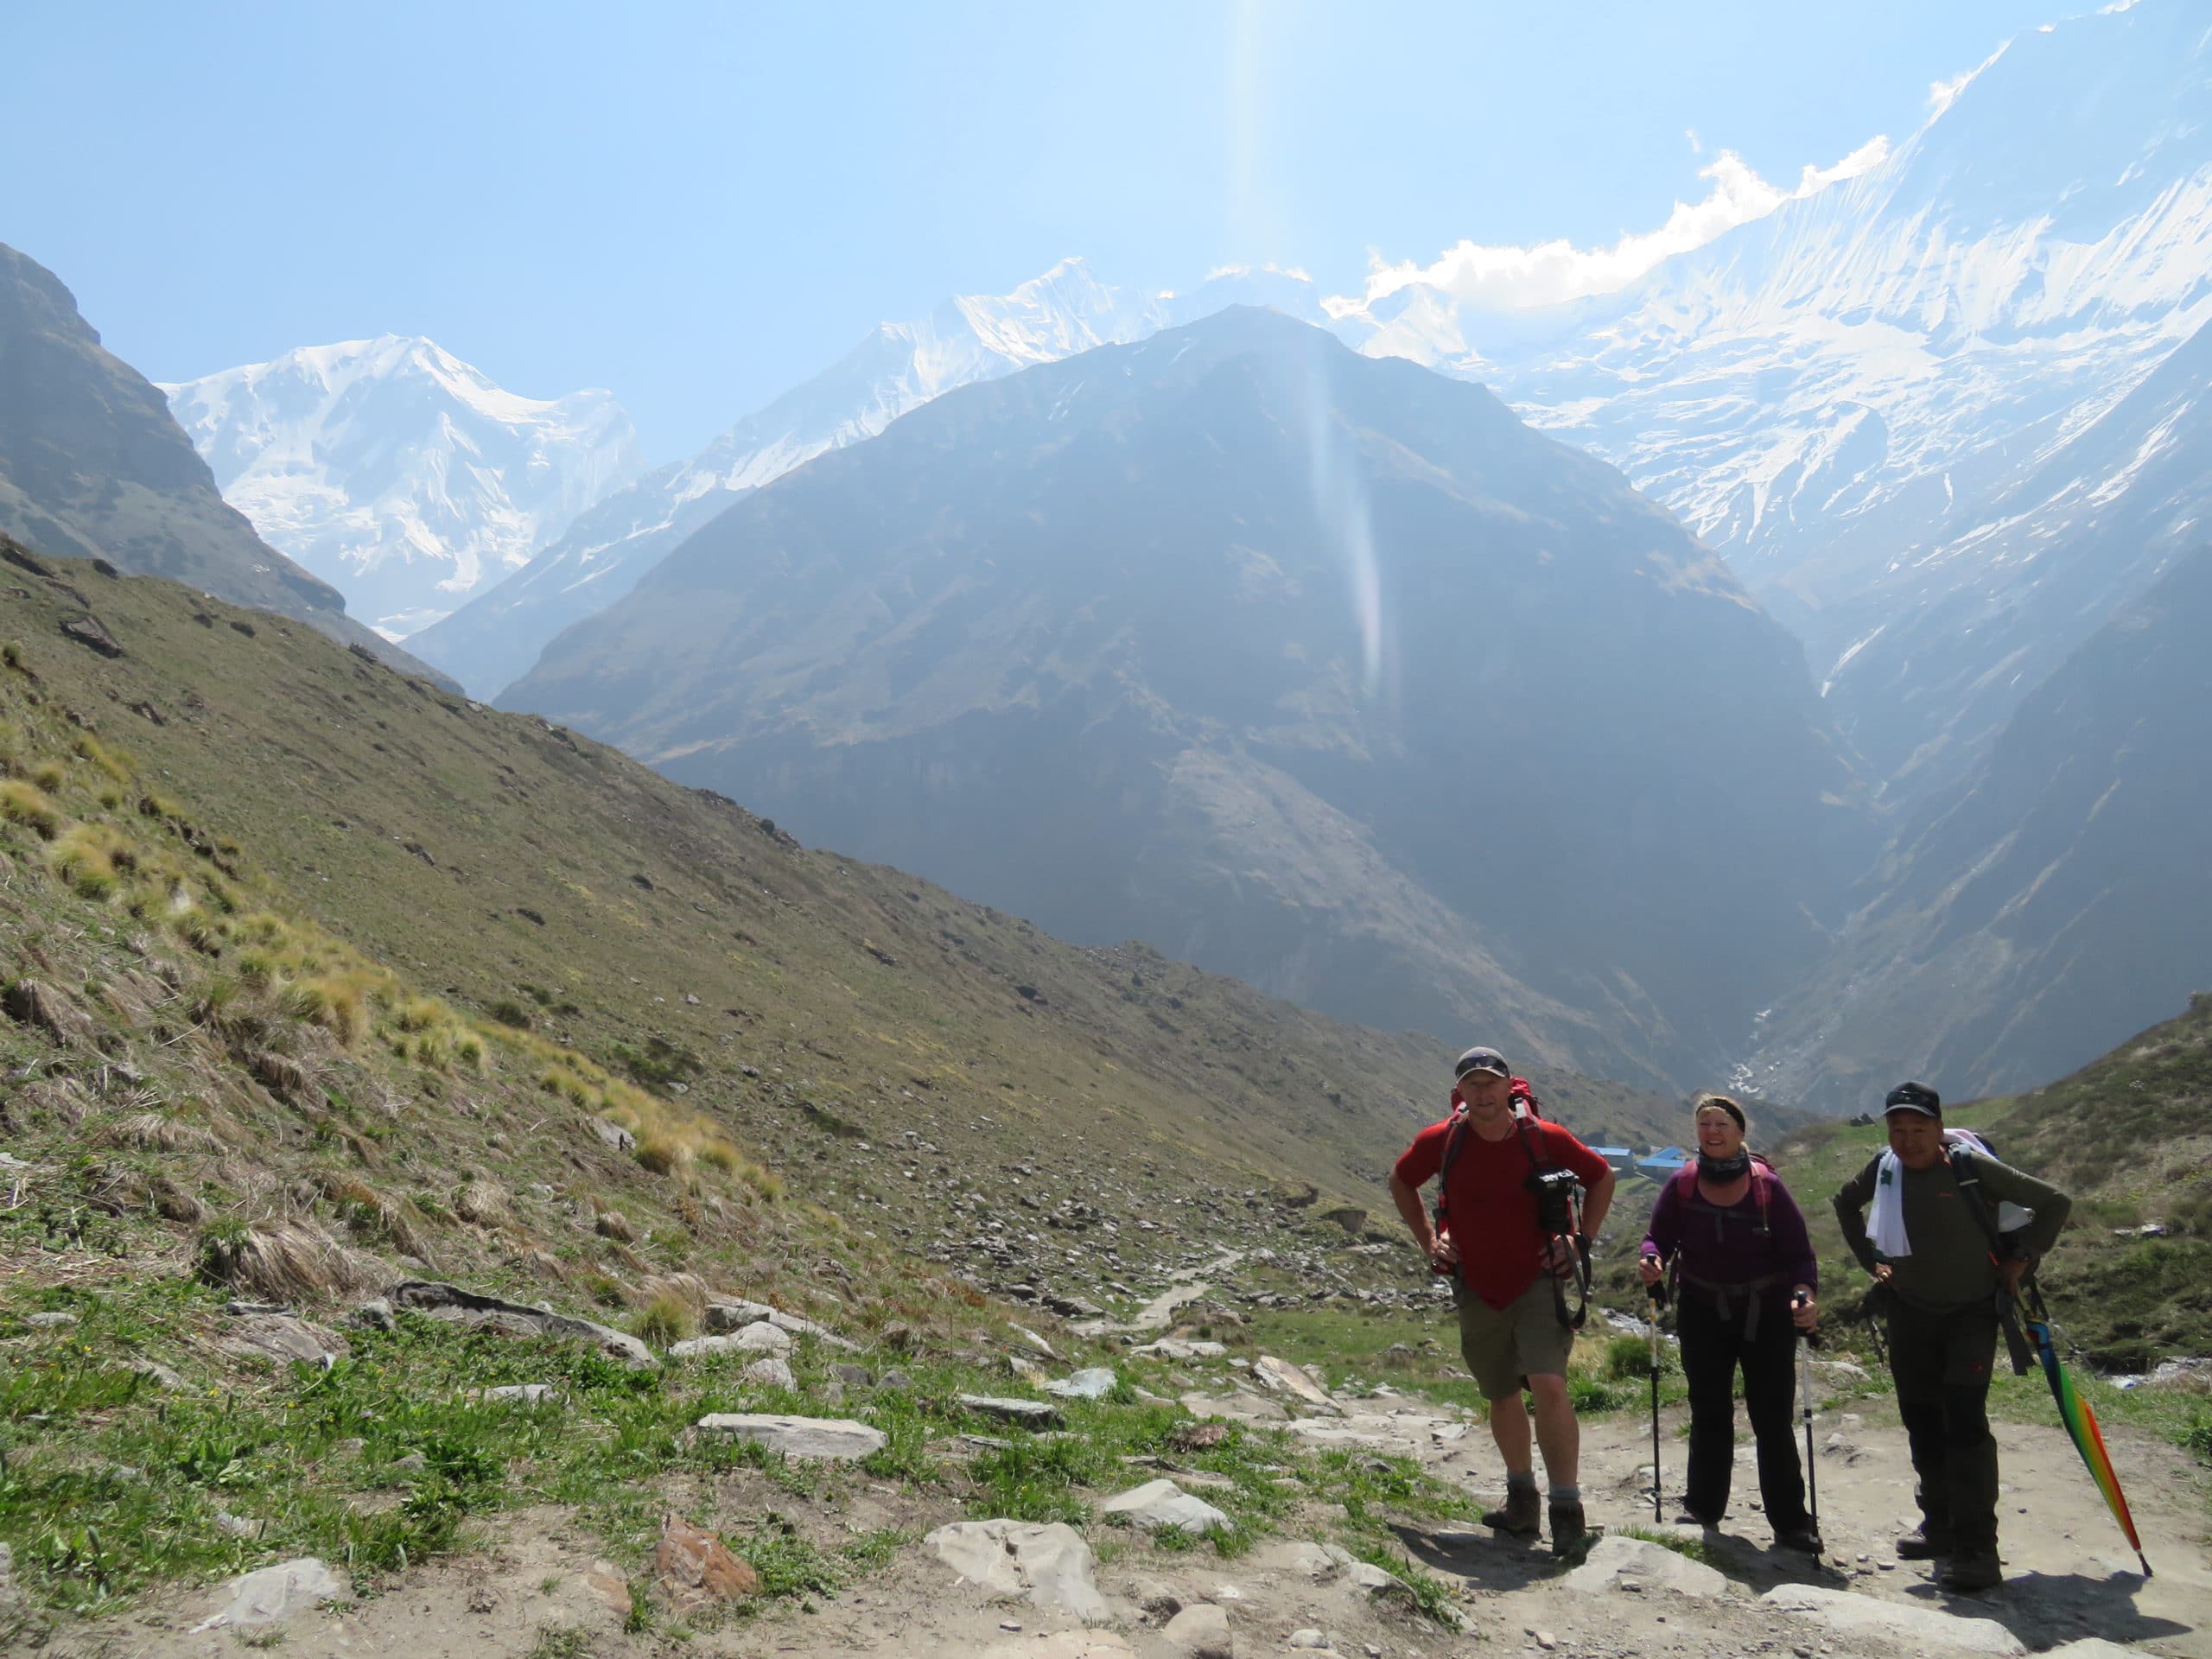 The valley that leads to Annapurna Base Camp